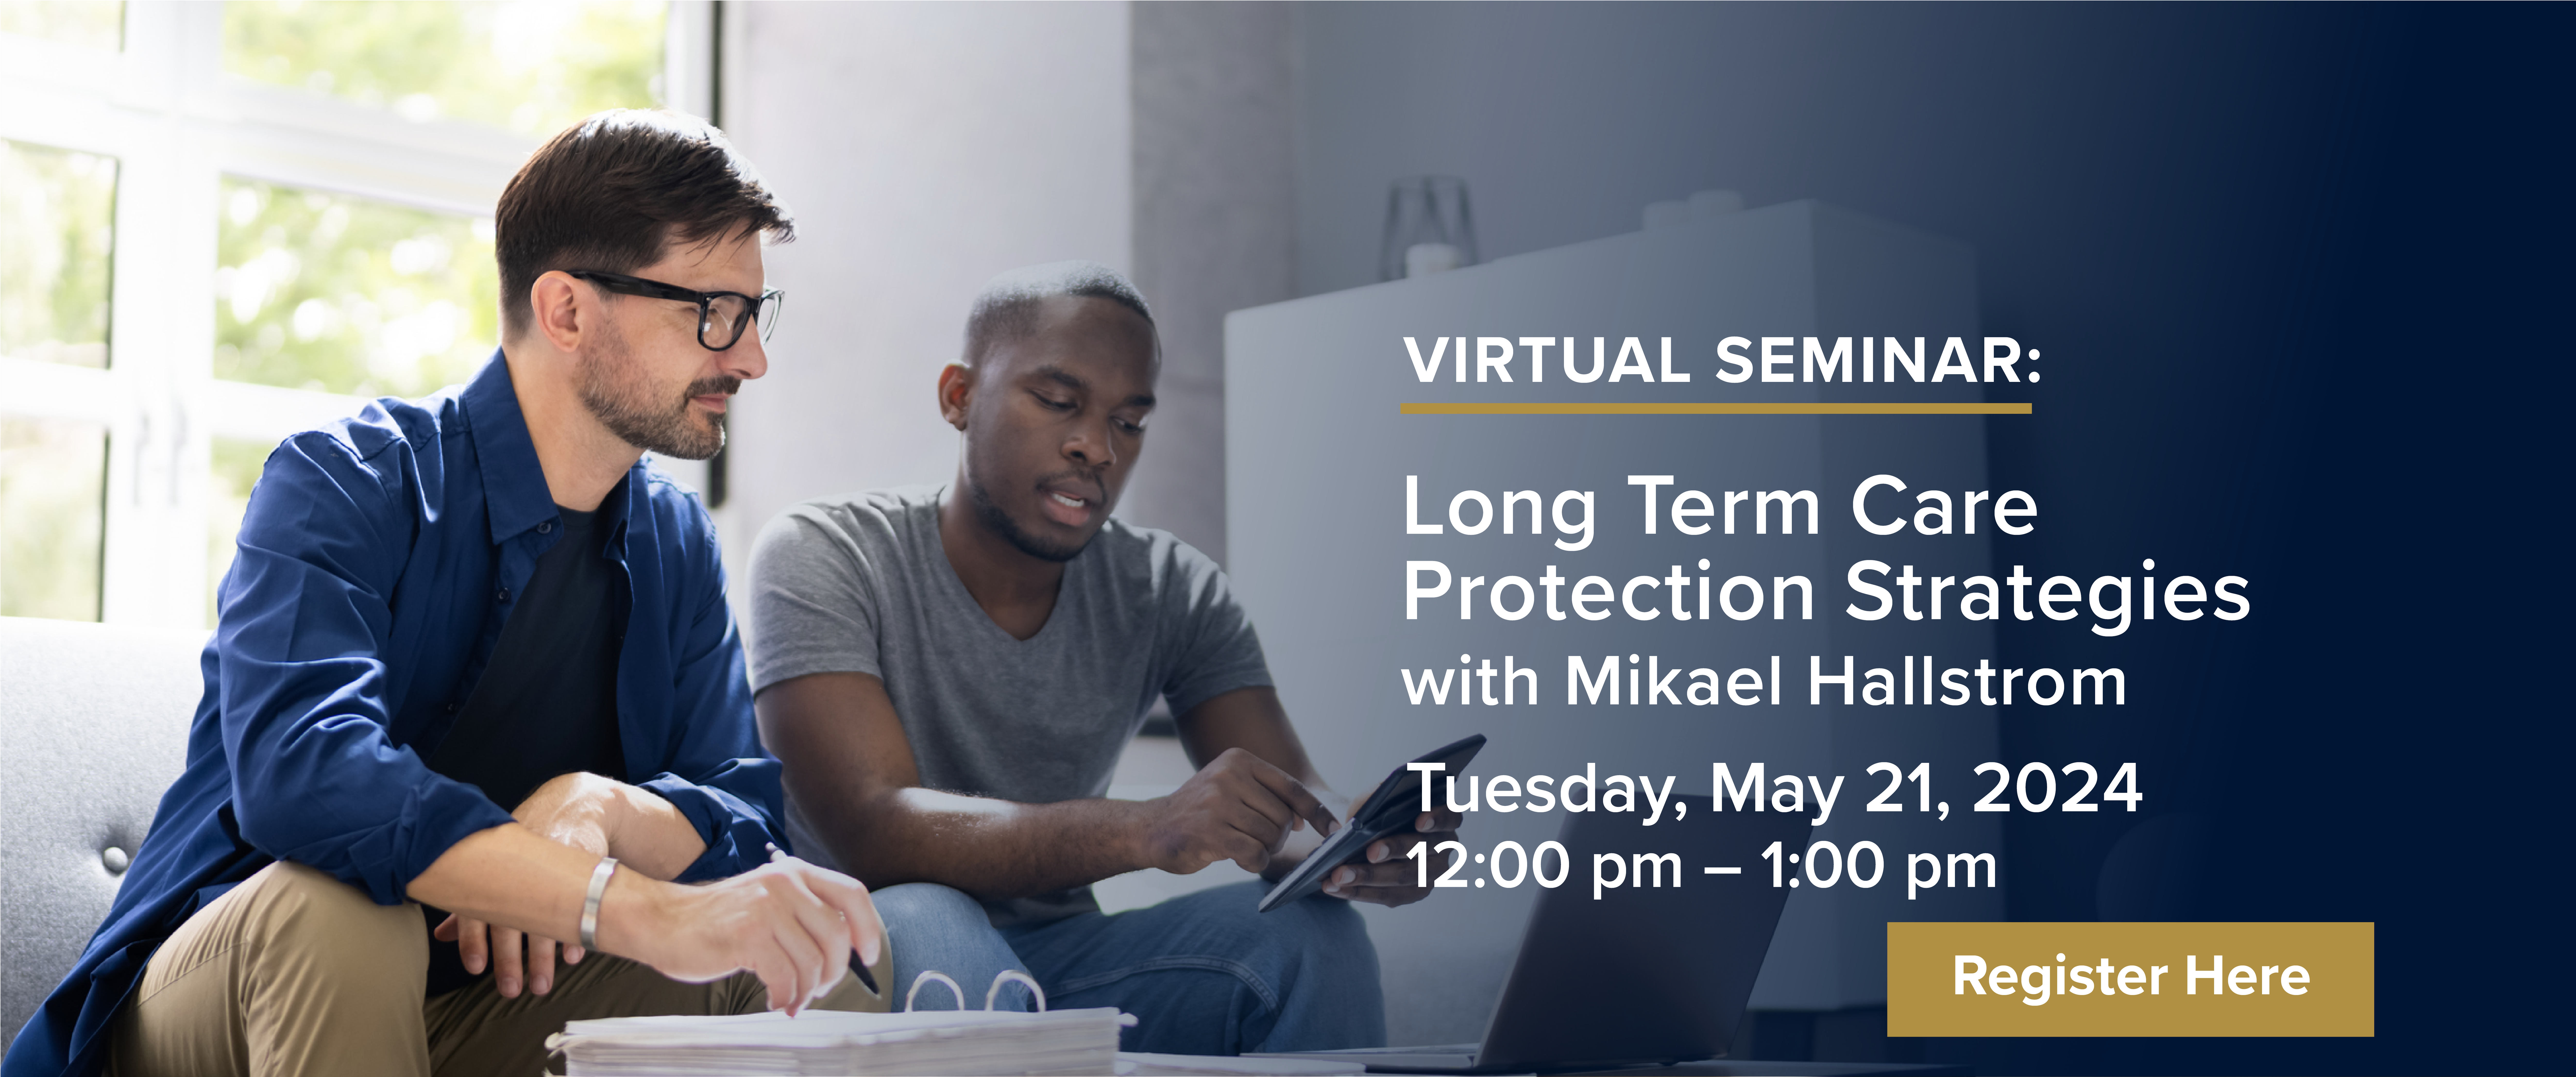 Virtual Seminar Long Term Care  Protection Strategies with Mikael Hallstrom Tuesday, May 21, 2024 12-1pm ET